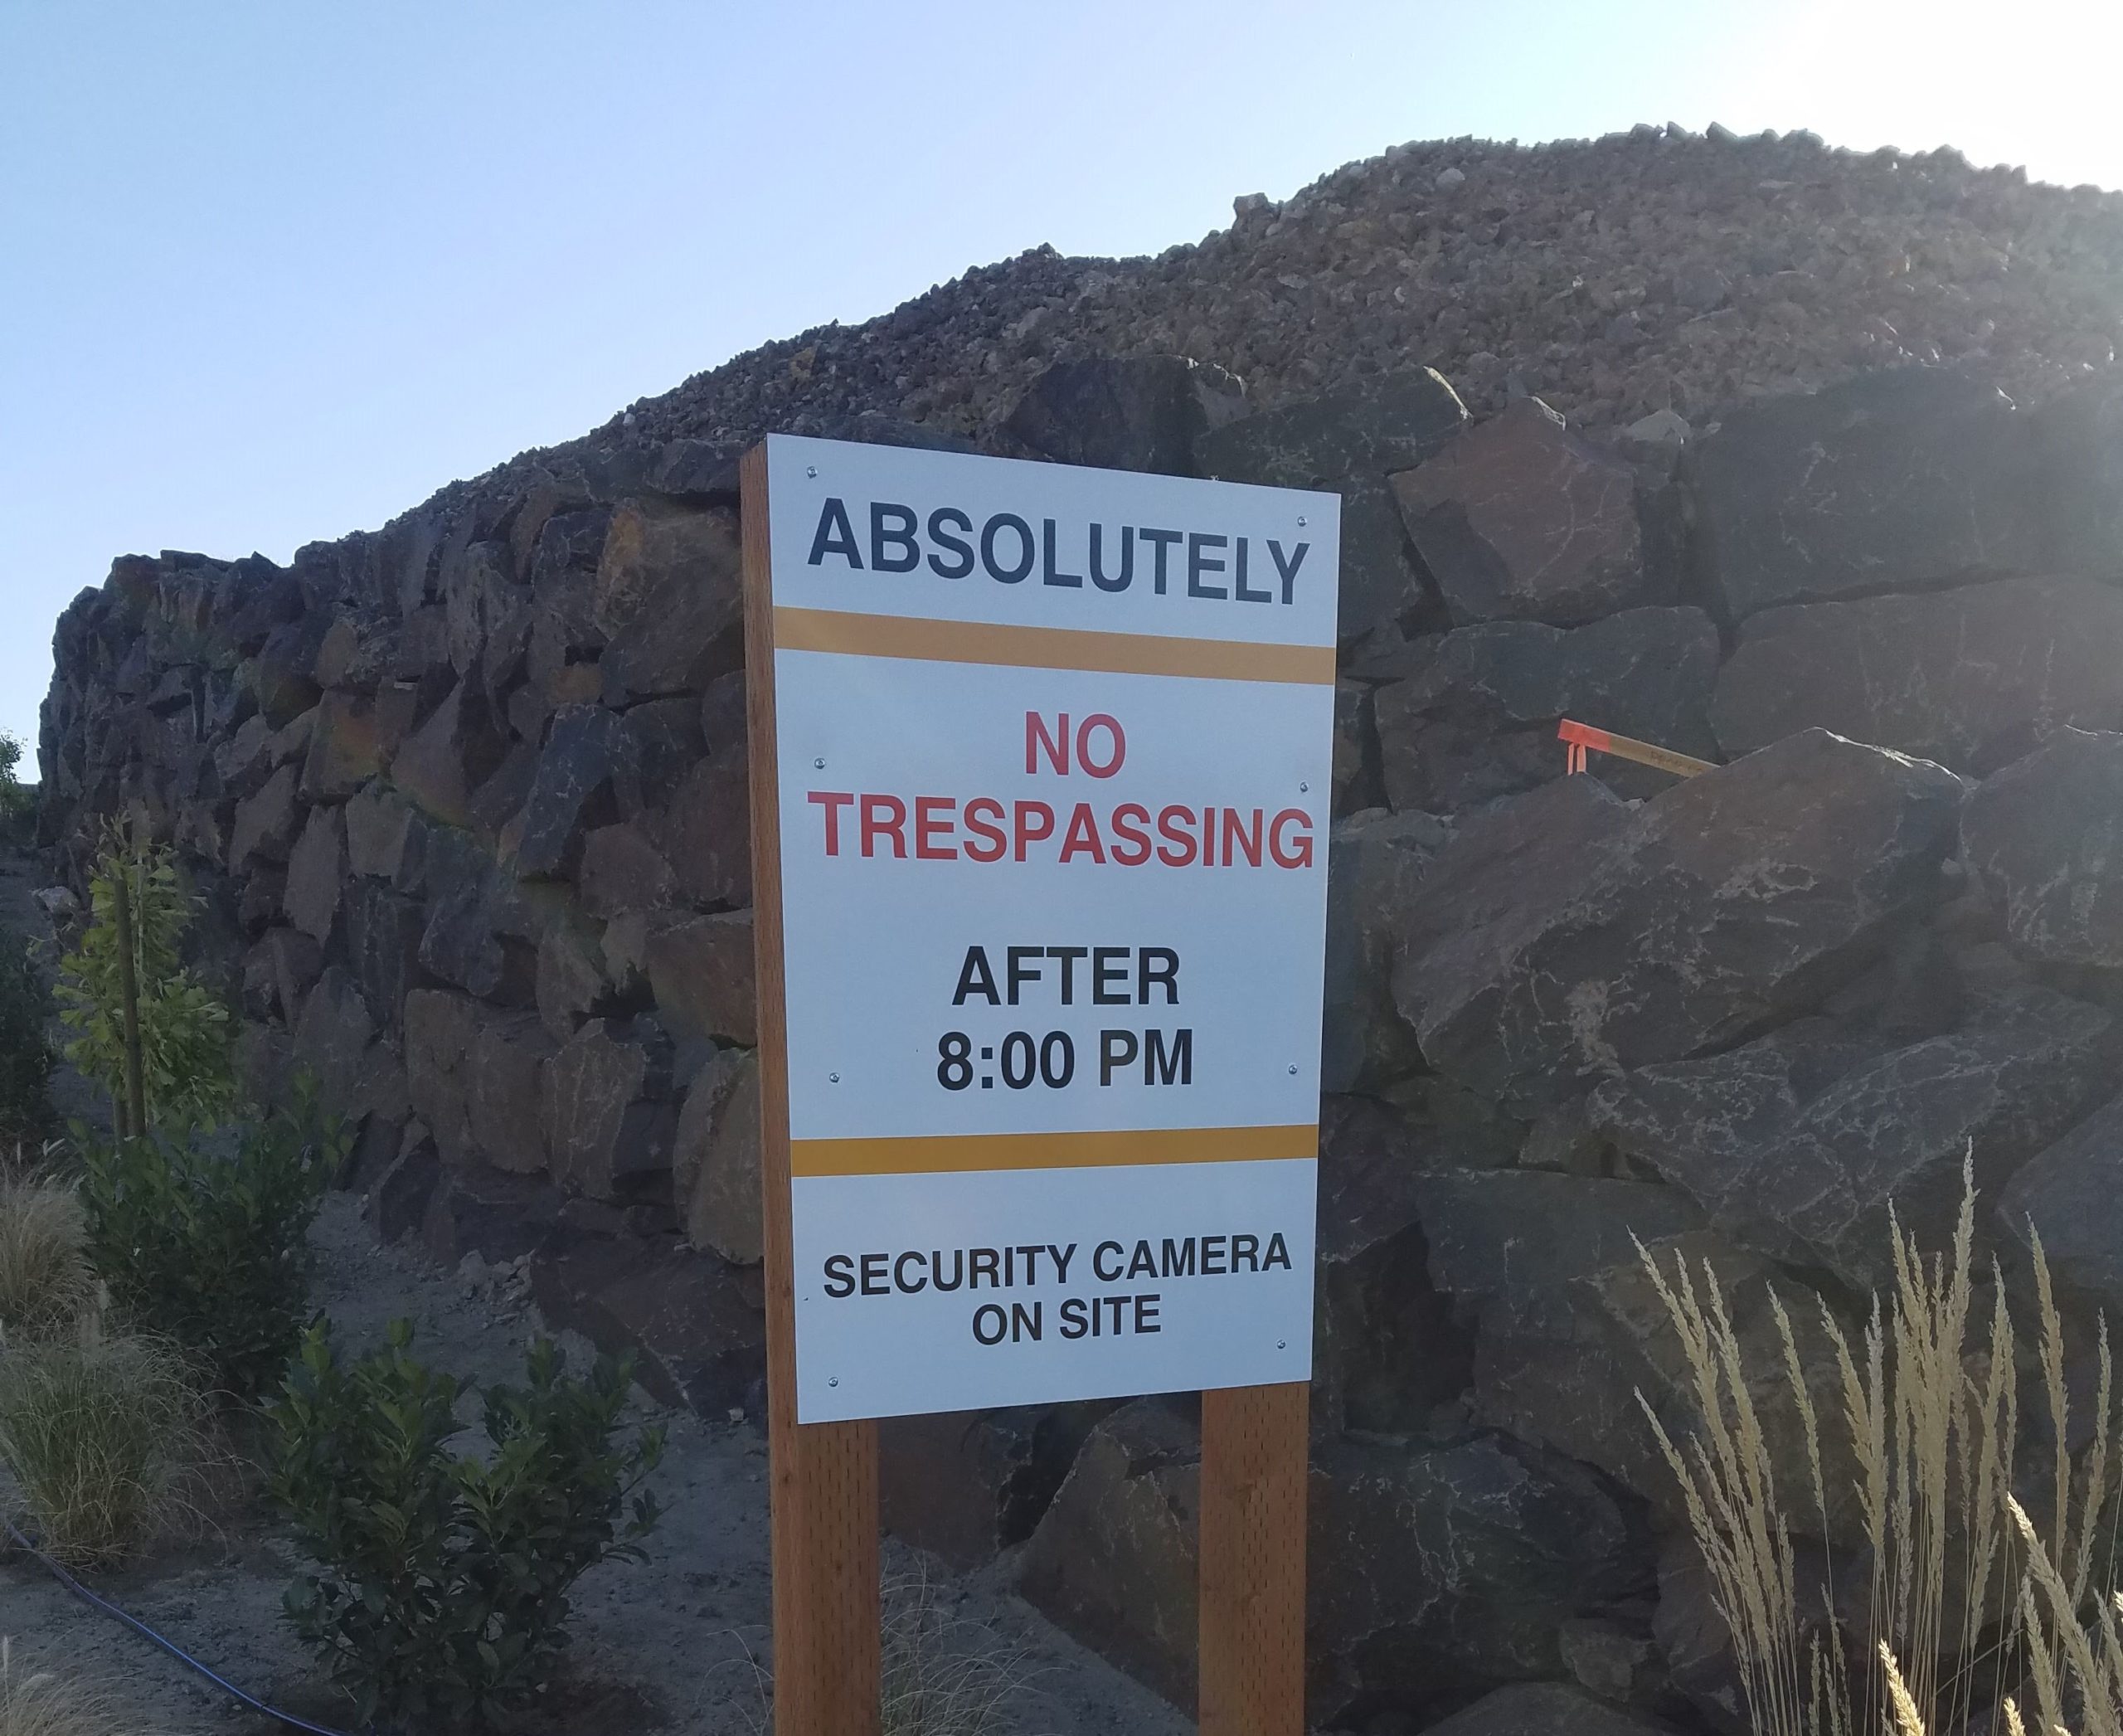 Absolutely no trespassing